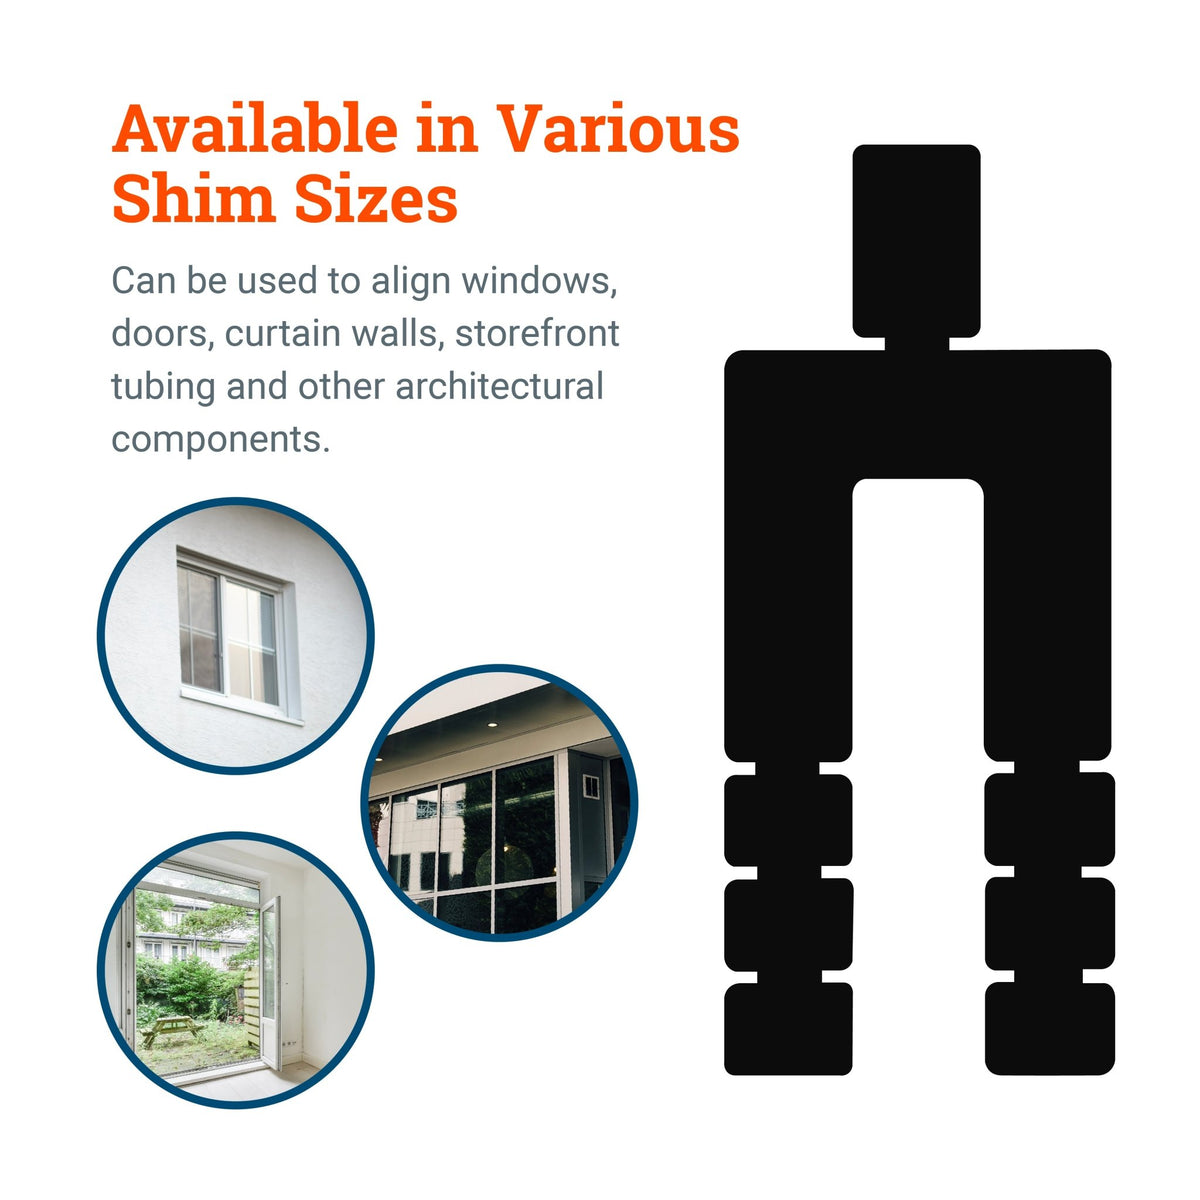 Plastic Structural Shimstack - 16 Pack - Adjustable Plastic Shims - 1/16” Thickness with 5/8 “ Slot Width - SHIM-116 - Picture Hang Solutions